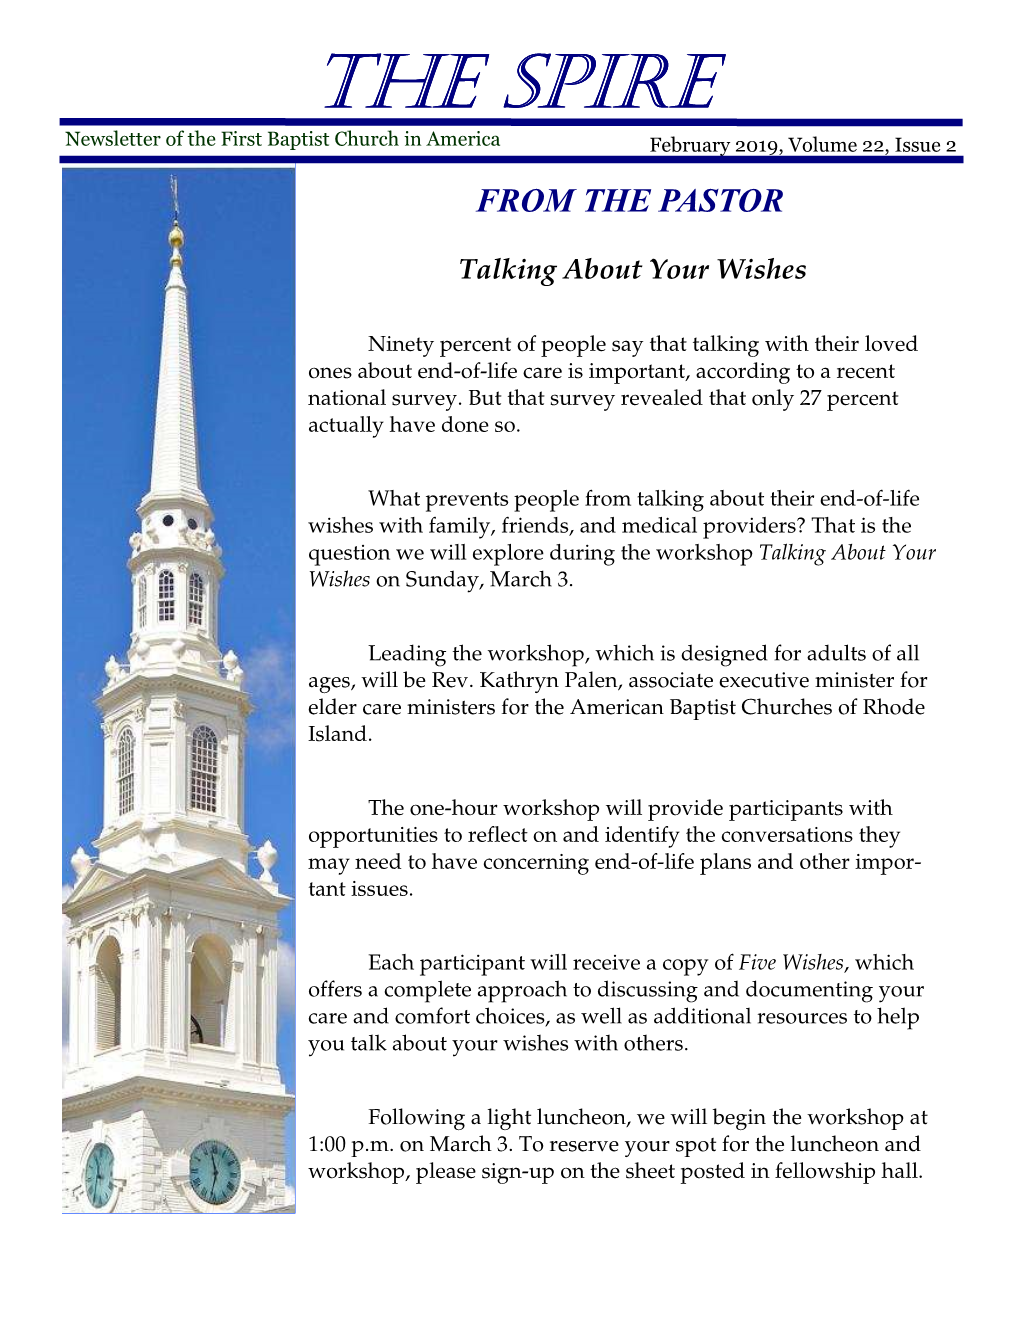 February 2019, Volume 22, Issue 2 from the PASTOR